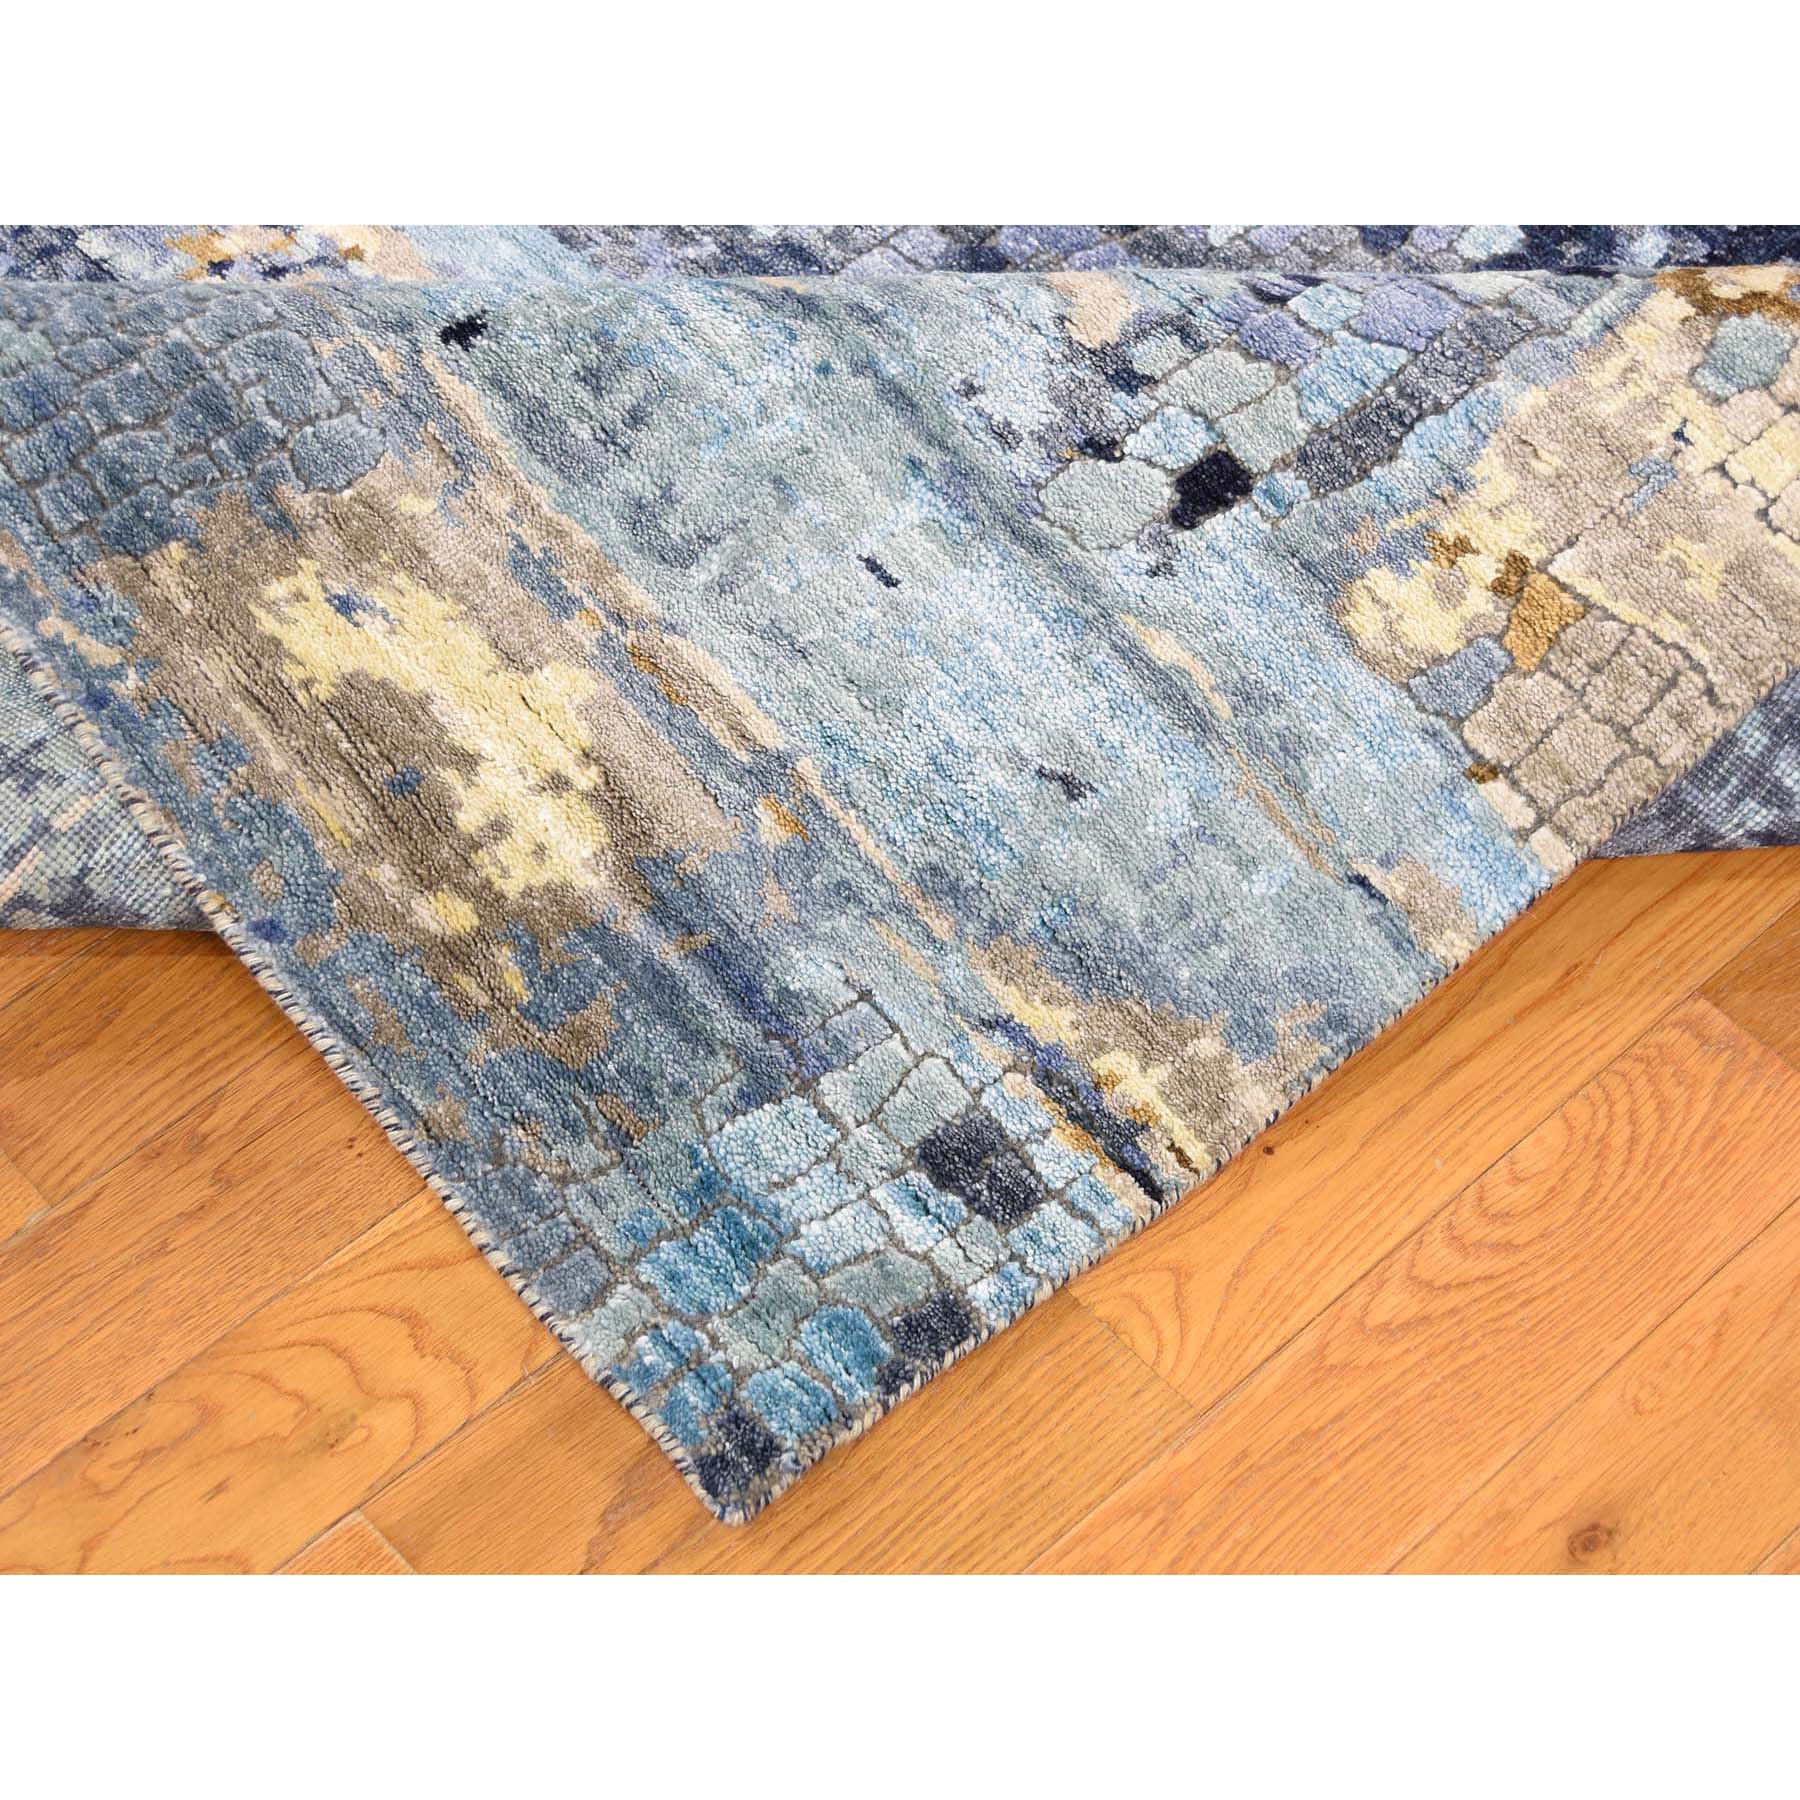 8-10 x12-1  Mosaic Design Blue Wool and Silk Hand-Knotted Oriental Rug 